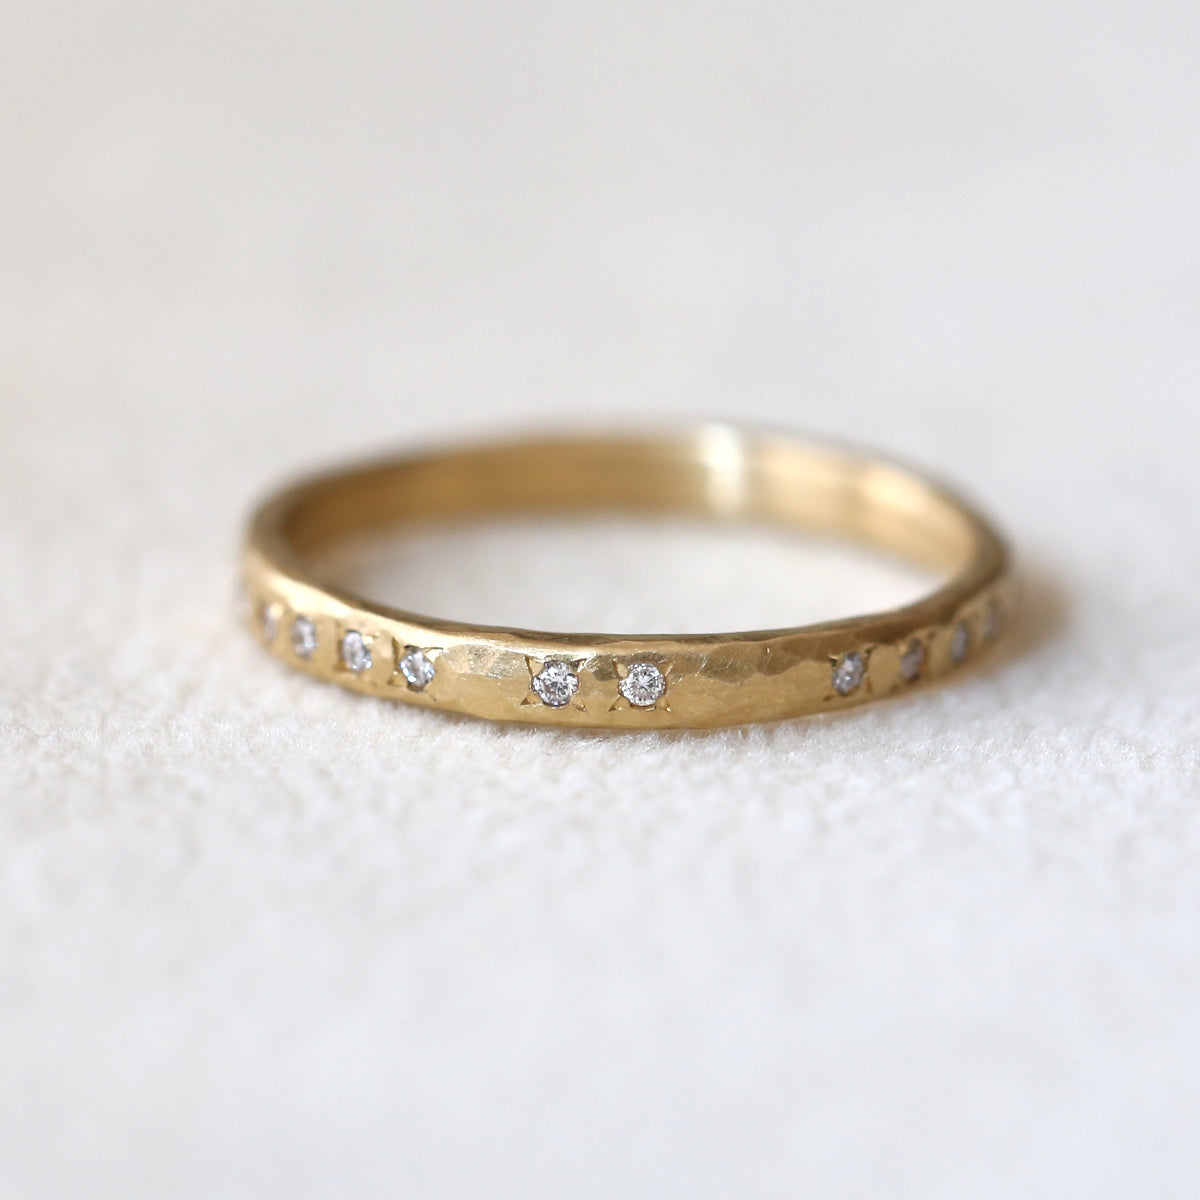 Hammered eternity band